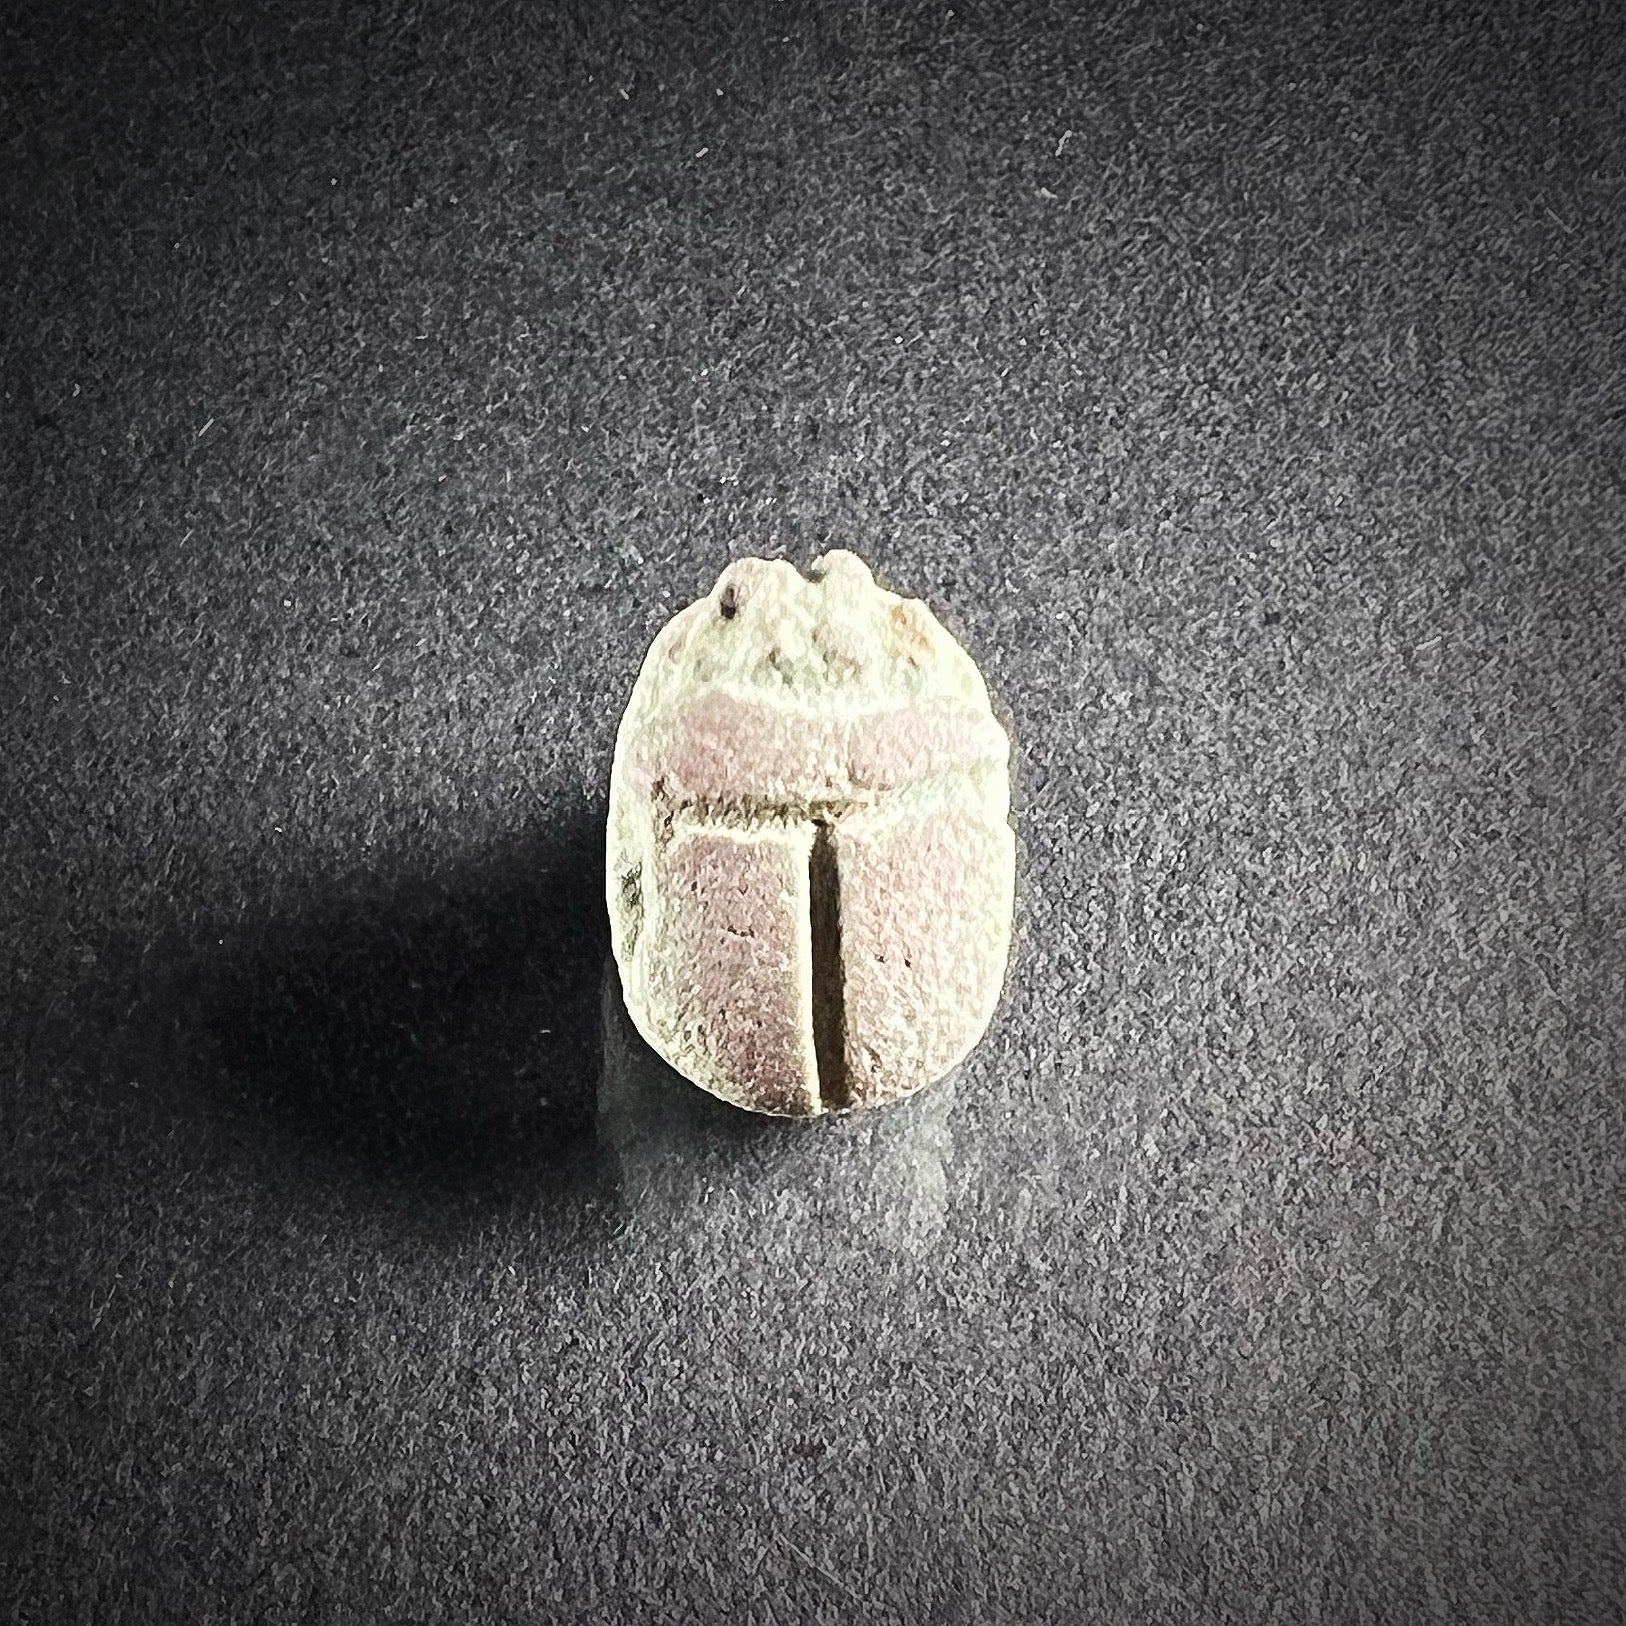 Ancient scarab of faience - top view